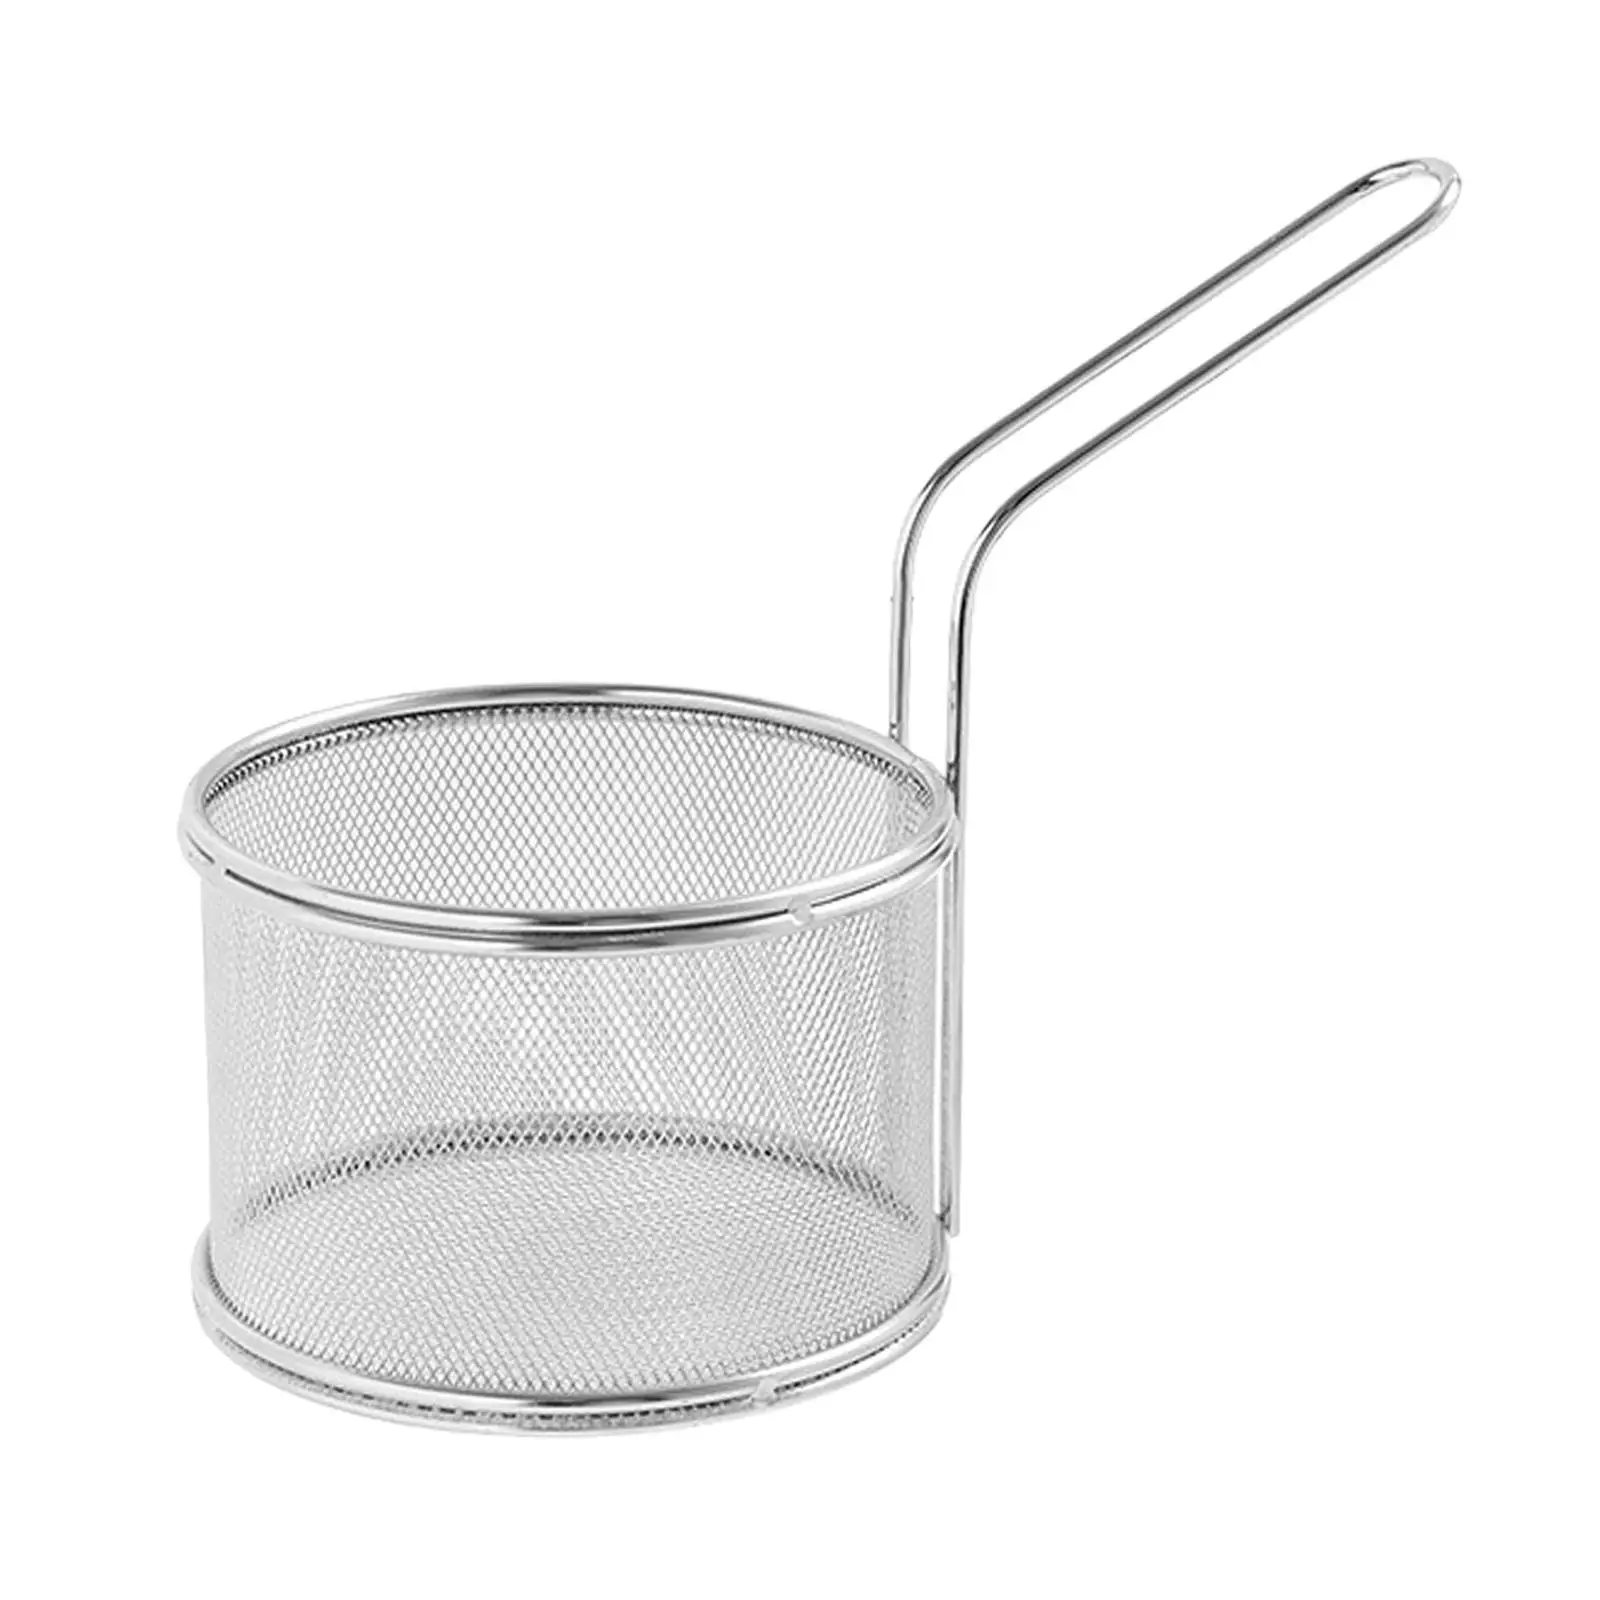 Deep Fry Basket French Fries Holder Stainless Steel for Home Cafe Barbecue